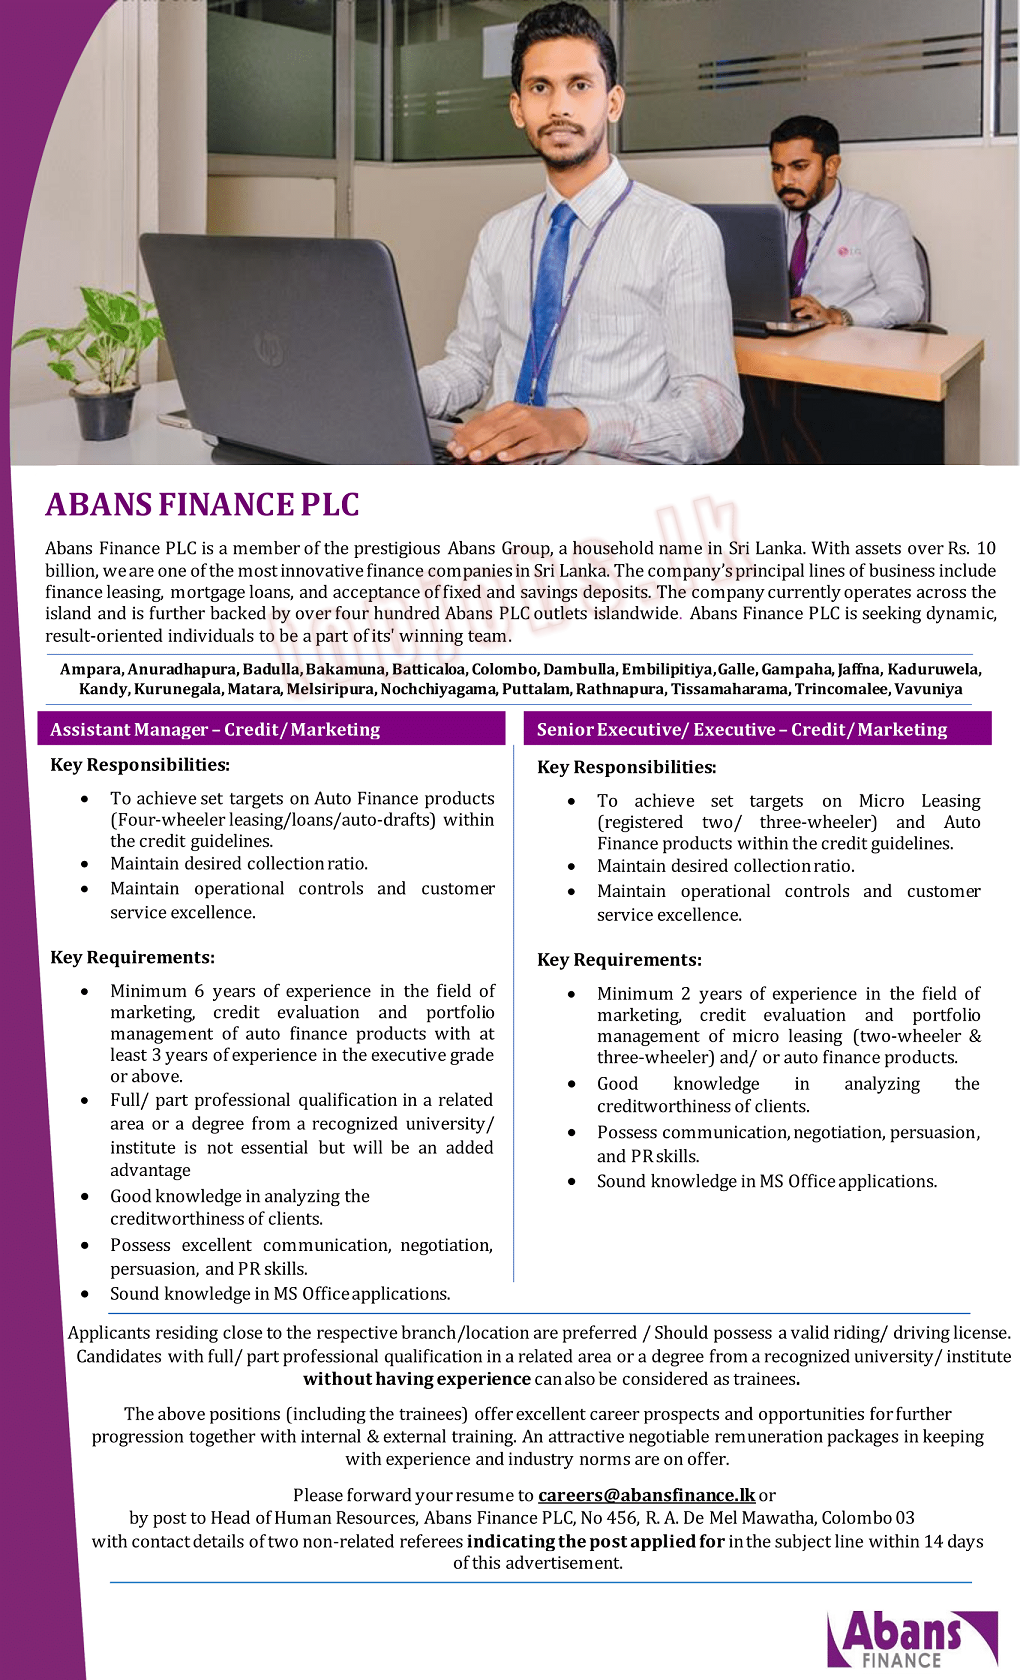 Assistant Manager & Executive of Credit / Marketing Abans Finance